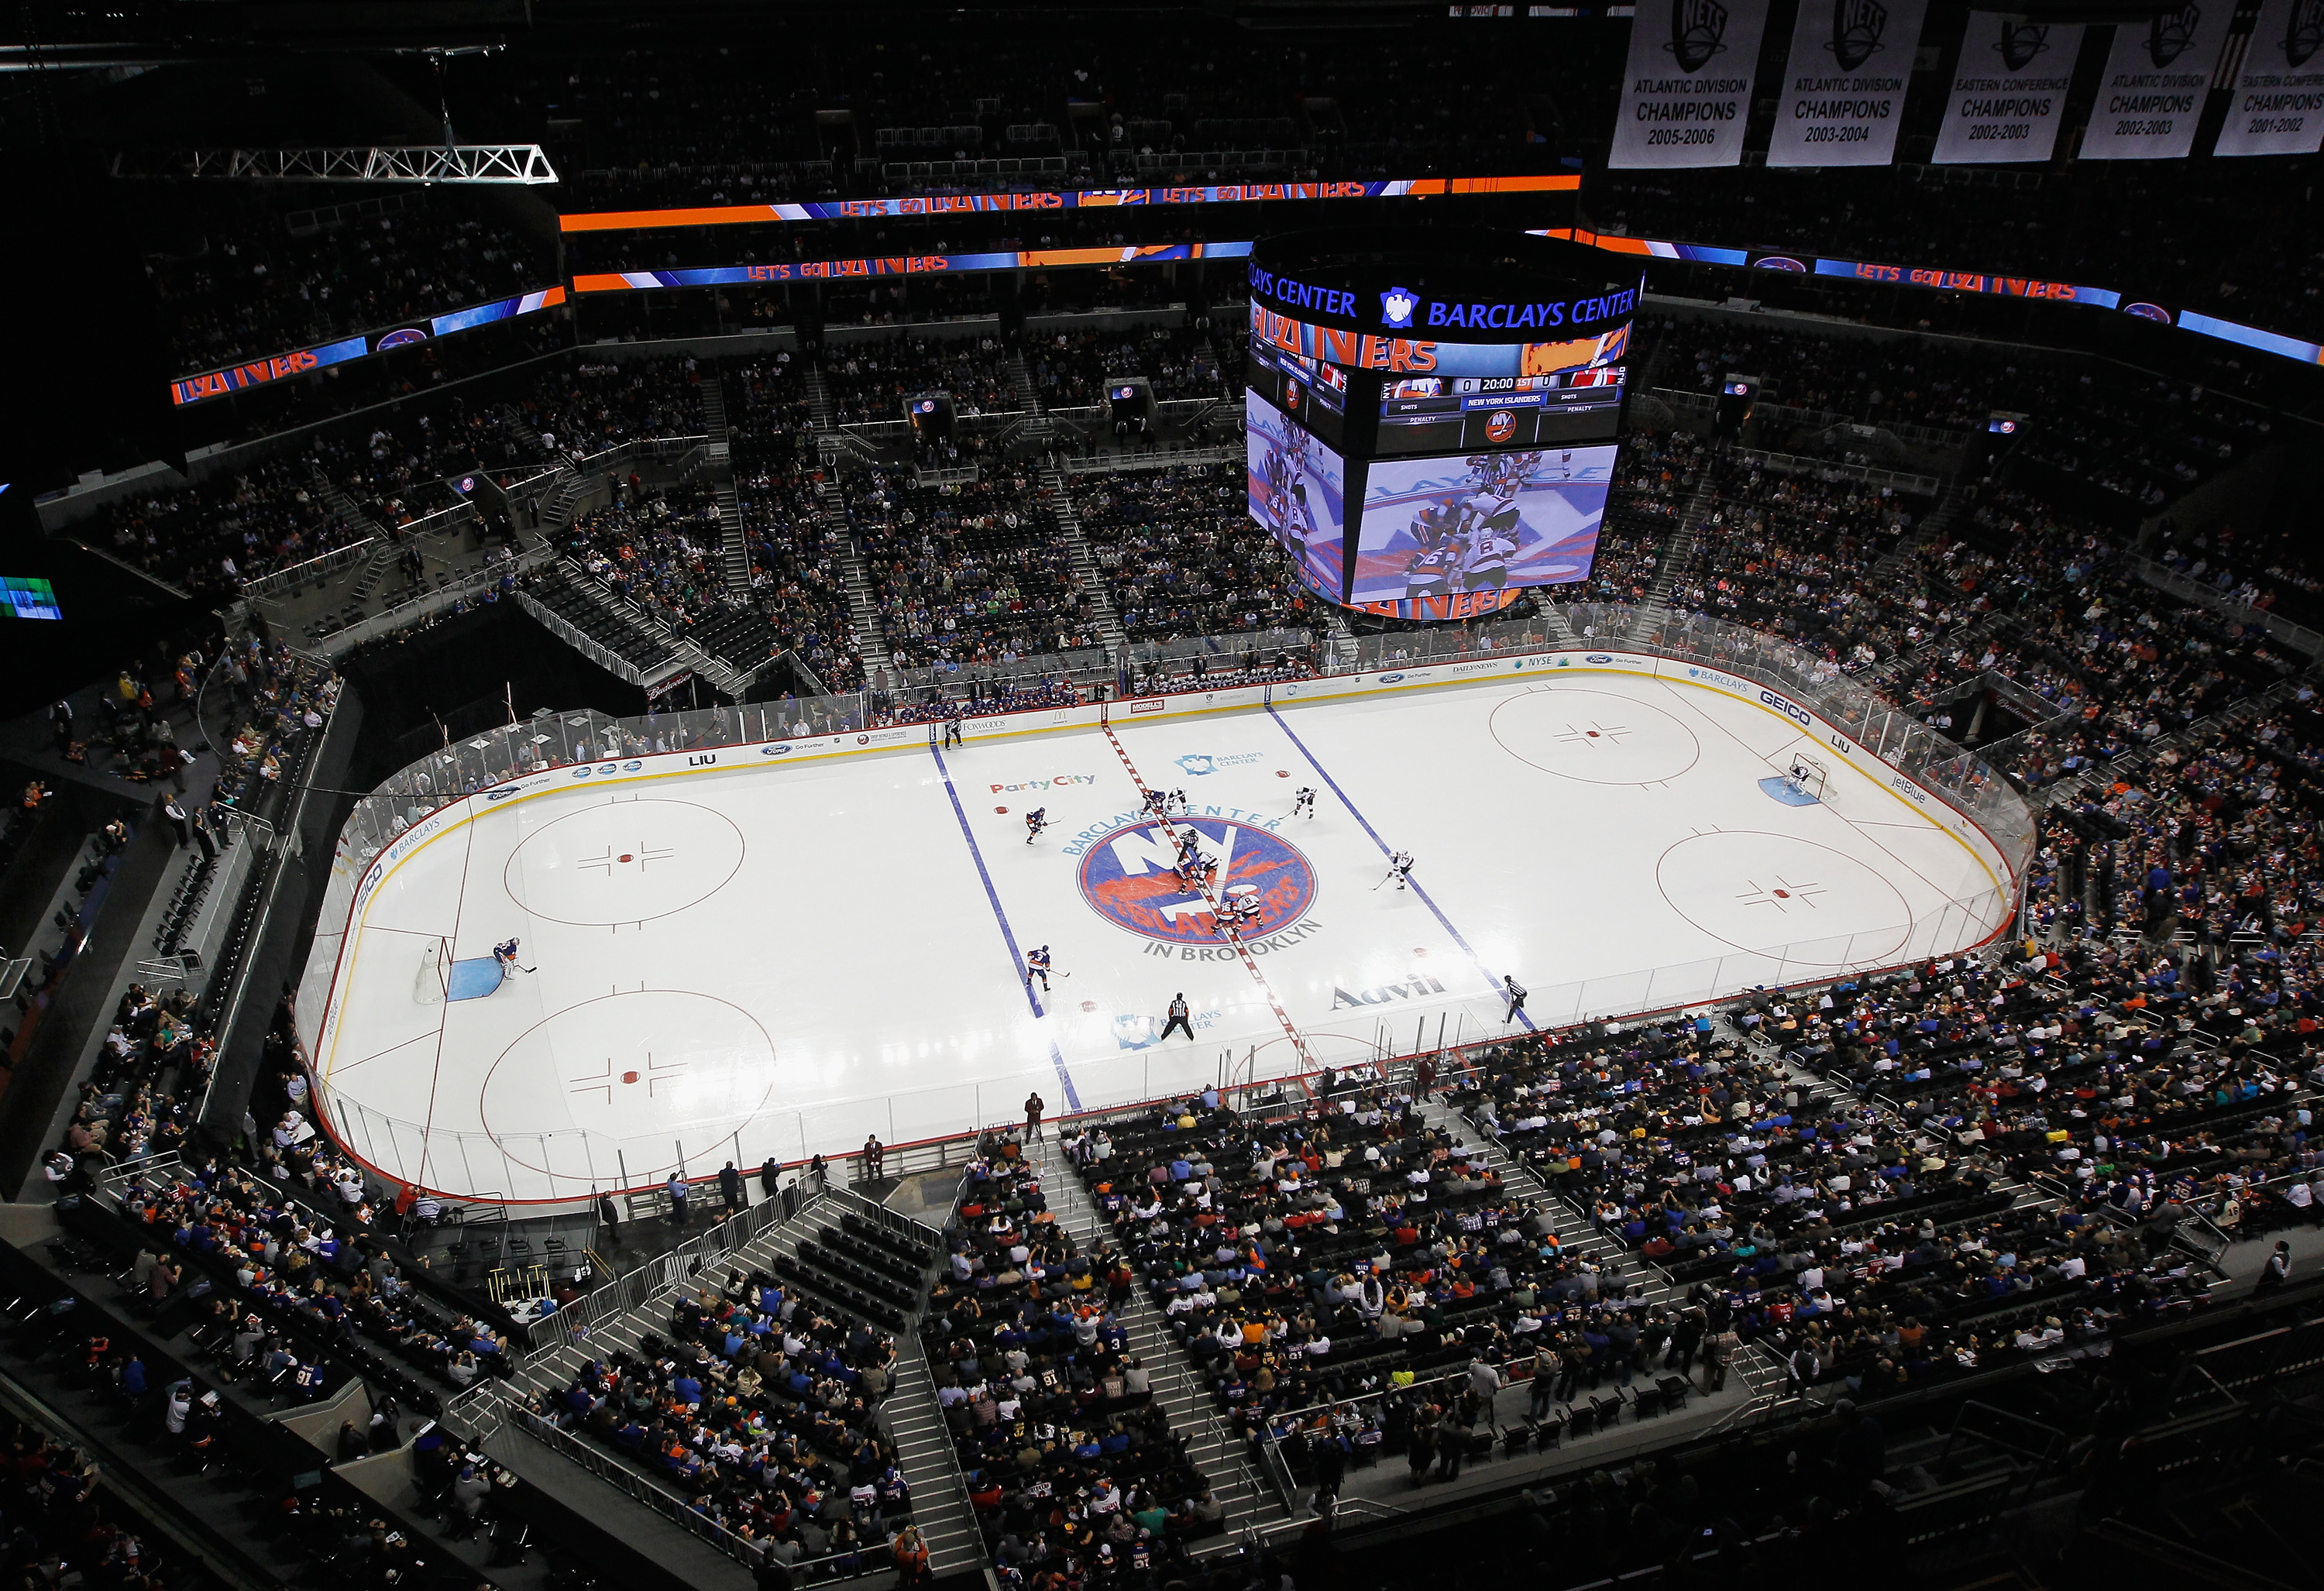 The New York Islanders and New Jersey Devils drop the opening puck during a preseason game at Barclays Center. (Photo by Bruce Bennett/Getty Images)